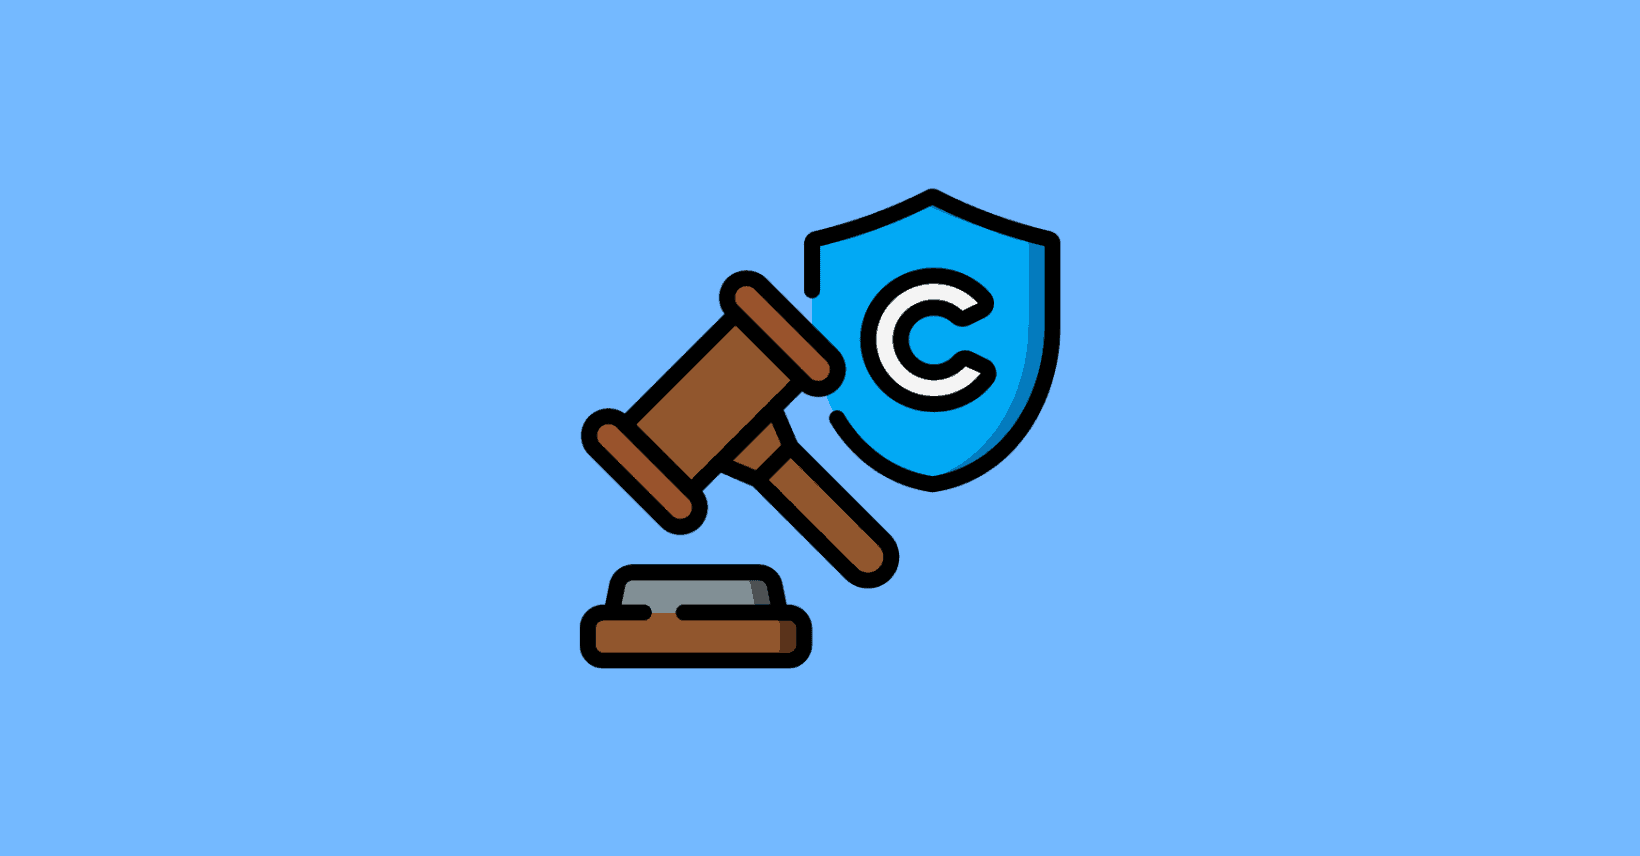 Blog Copyright How To Copyright A Blog & Avoid Infringement FI